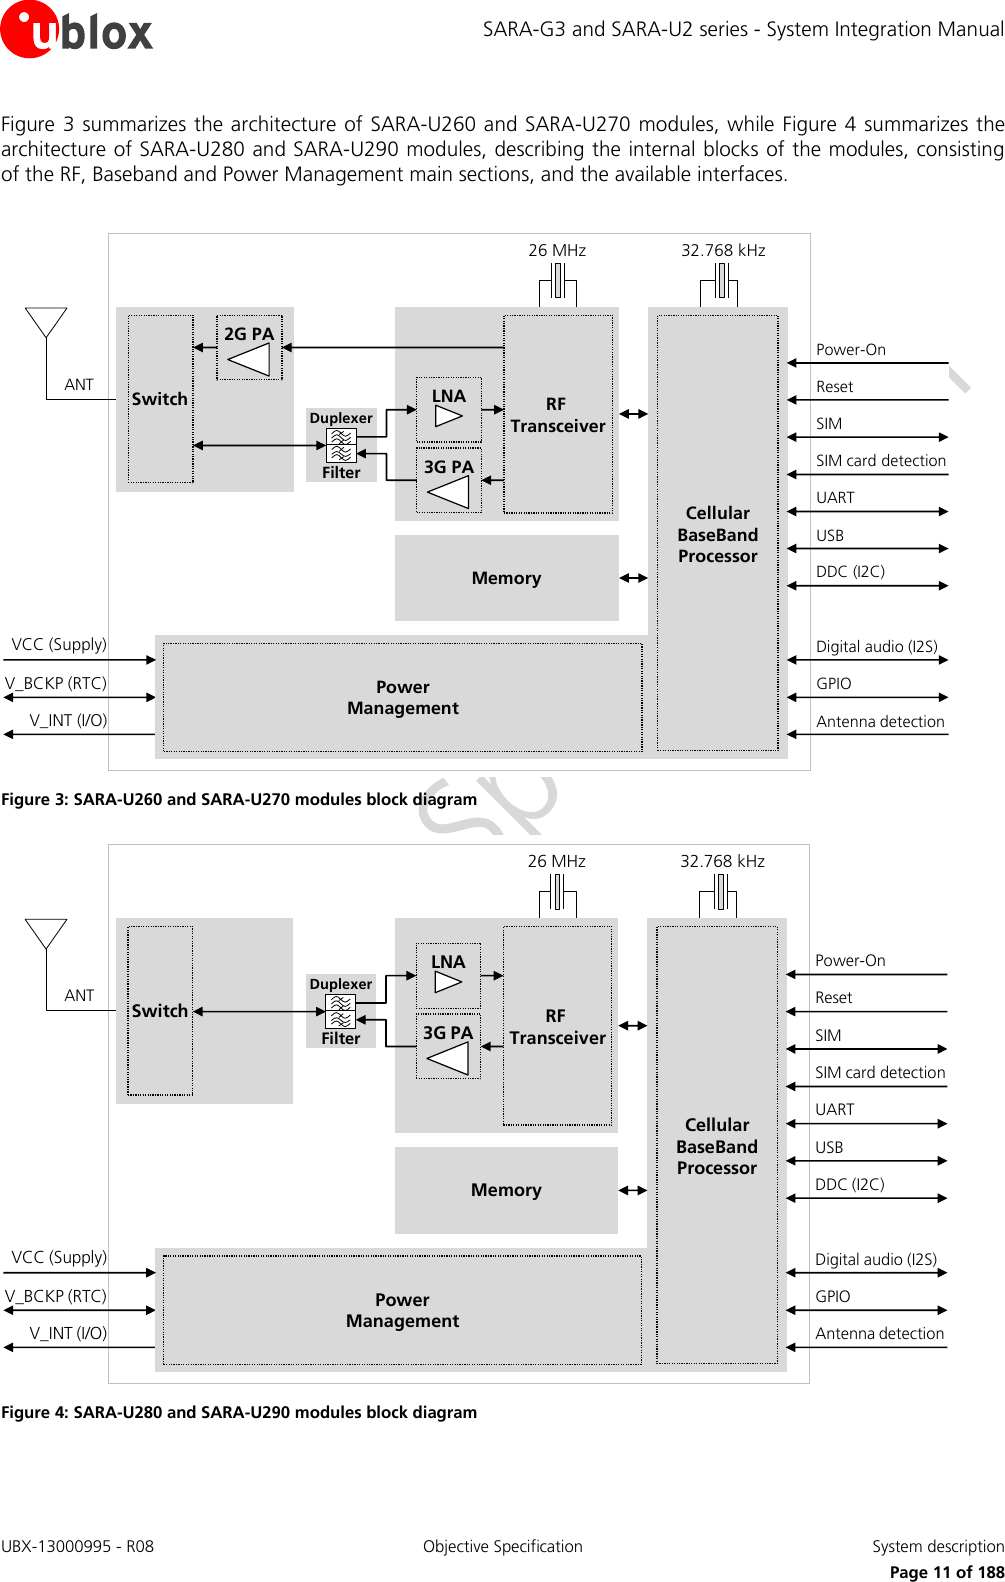 SARA-G3 and SARA-U2 series - System Integration Manual UBX-13000995 - R08  Objective Specification  System description     Page 11 of 188 Figure 3 summarizes the architecture of SARA-U260 and SARA-U270 modules, while Figure 4 summarizes the architecture of SARA-U280 and SARA-U290 modules, describing the internal blocks of the modules, consisting of the RF, Baseband and Power Management main sections, and the available interfaces.  MemoryV_BCKP (RTC)V_INT (I/O)RF TransceiverPowerManagementCellularBaseBandProcessorANTVCC (Supply)USBDDC (I2C)SIM card detectionSIMUARTPower-OnResetDigital audio (I2S)GPIOAntenna detection3G PA26 MHzDuplexerFilterSwitch2G PALNA32.768 kHz Figure 3: SARA-U260 and SARA-U270 modules block diagram MemoryV_BCKP (RTC)V_INT (I/O)RF TransceiverPowerManagementCellularBaseBandProcessorANTVCC (Supply)USBDDC (I2C)SIM card detectionSIMUARTPower-OnResetDigital audio (I2S)GPIOAntenna detection3G PA26 MHzDuplexerFilterSwitchLNA32.768 kHz Figure 4: SARA-U280 and SARA-U290 modules block diagram  